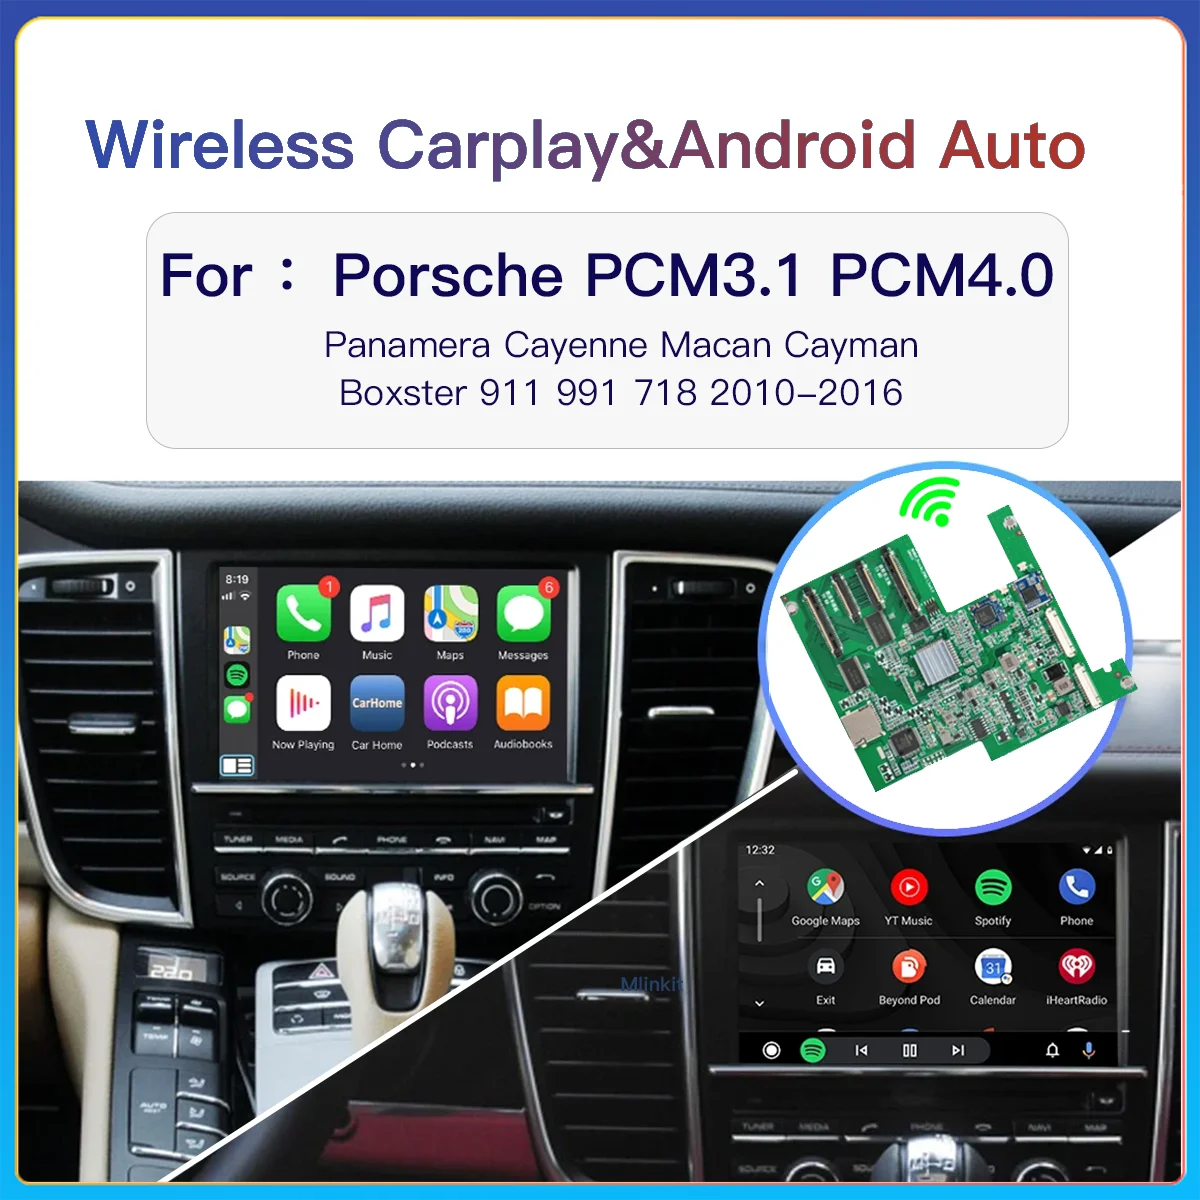 

Wireless Carplay Android Auto For Porsche PCM3.1 PCM4.0 Panamera Cayenne Cayman Macan Boxster 911 991 718 navigation Car Play